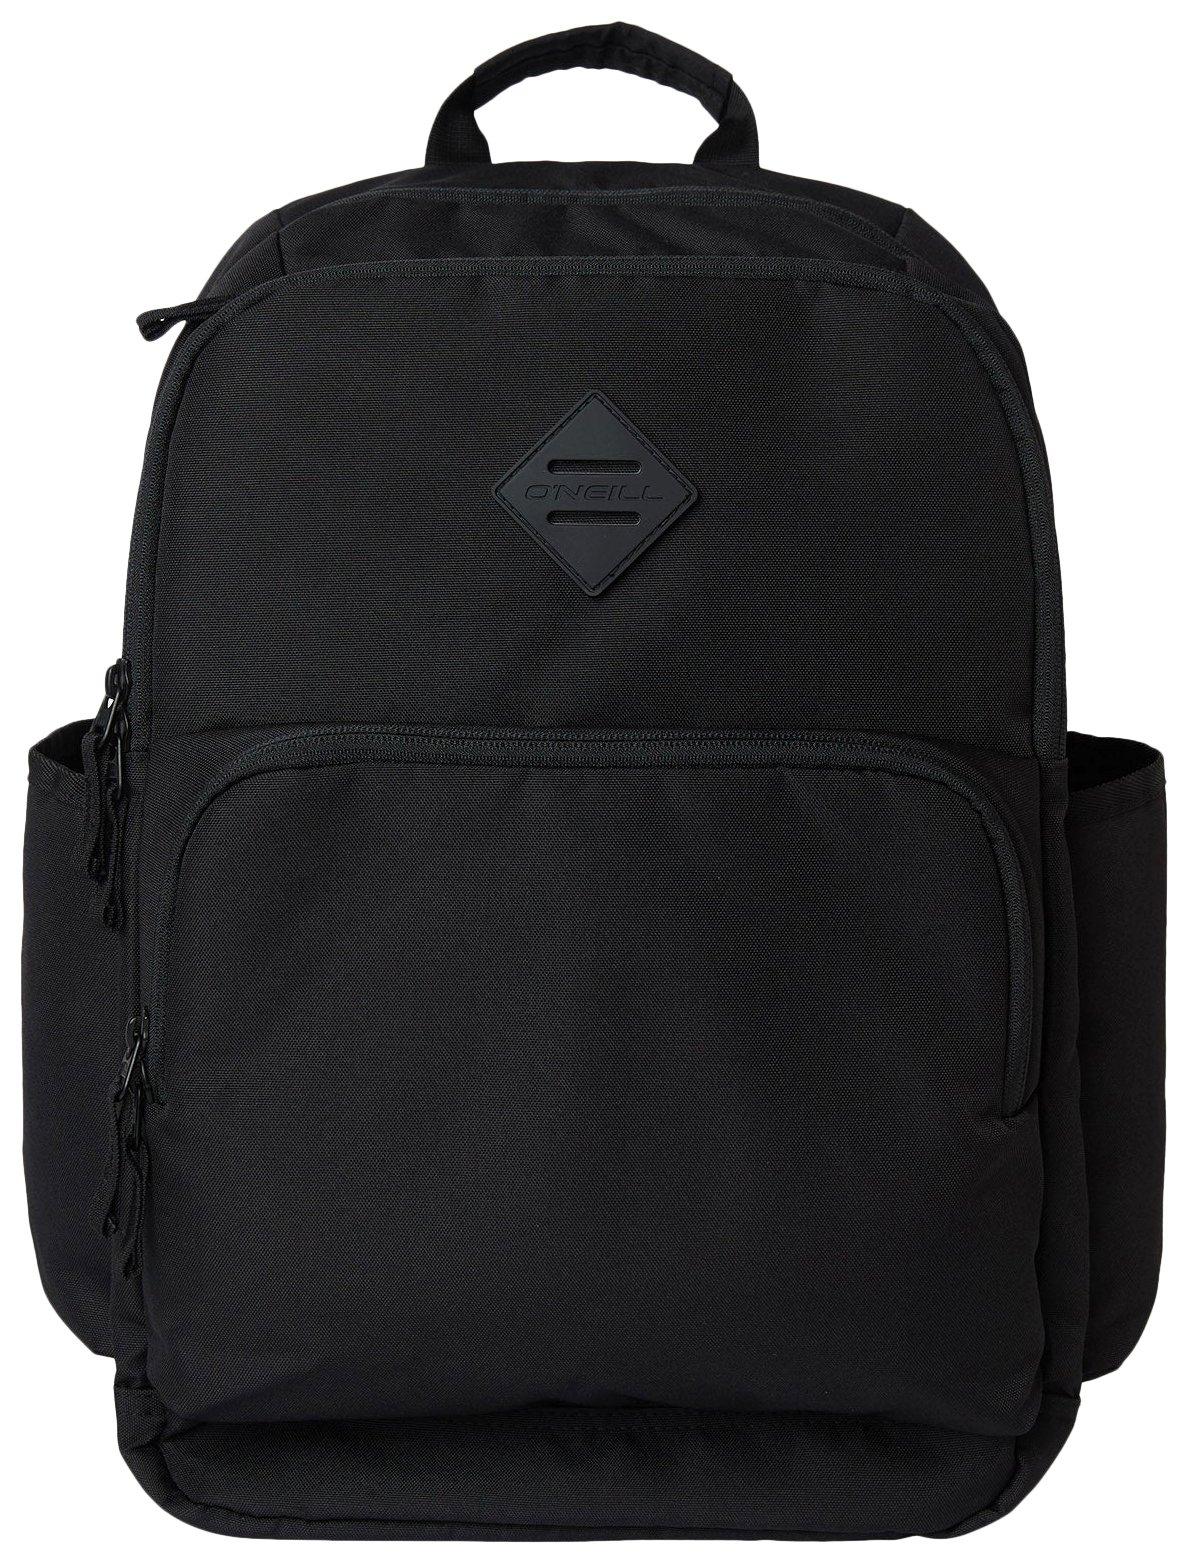 O'Neill Poly Canvas School Bag Backpack